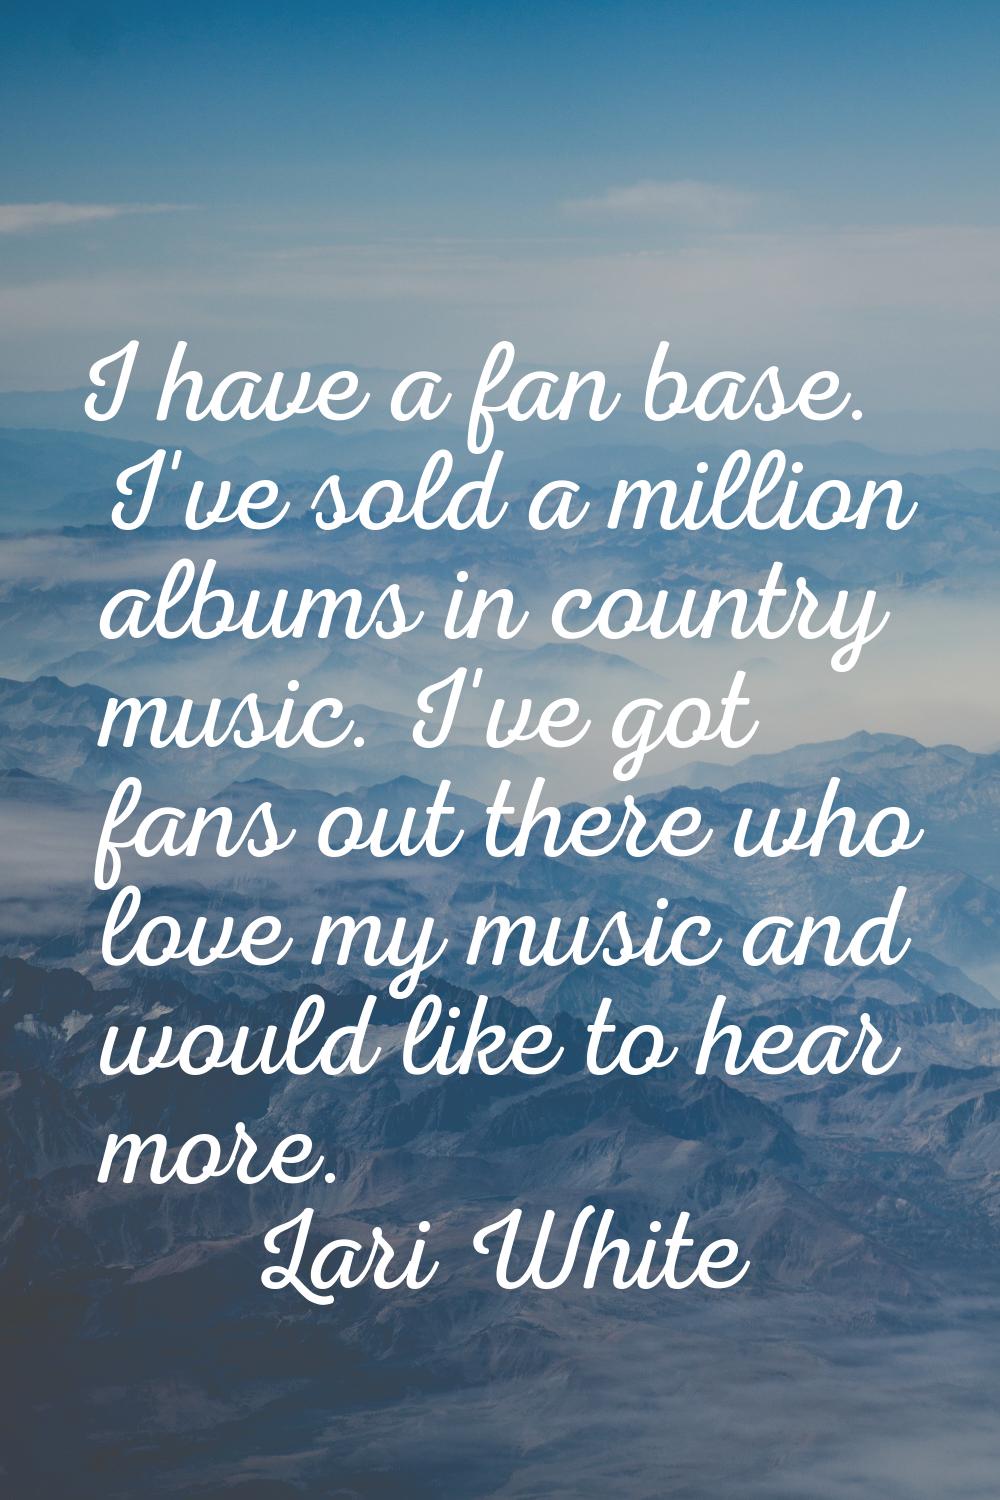 I have a fan base. I've sold a million albums in country music. I've got fans out there who love my